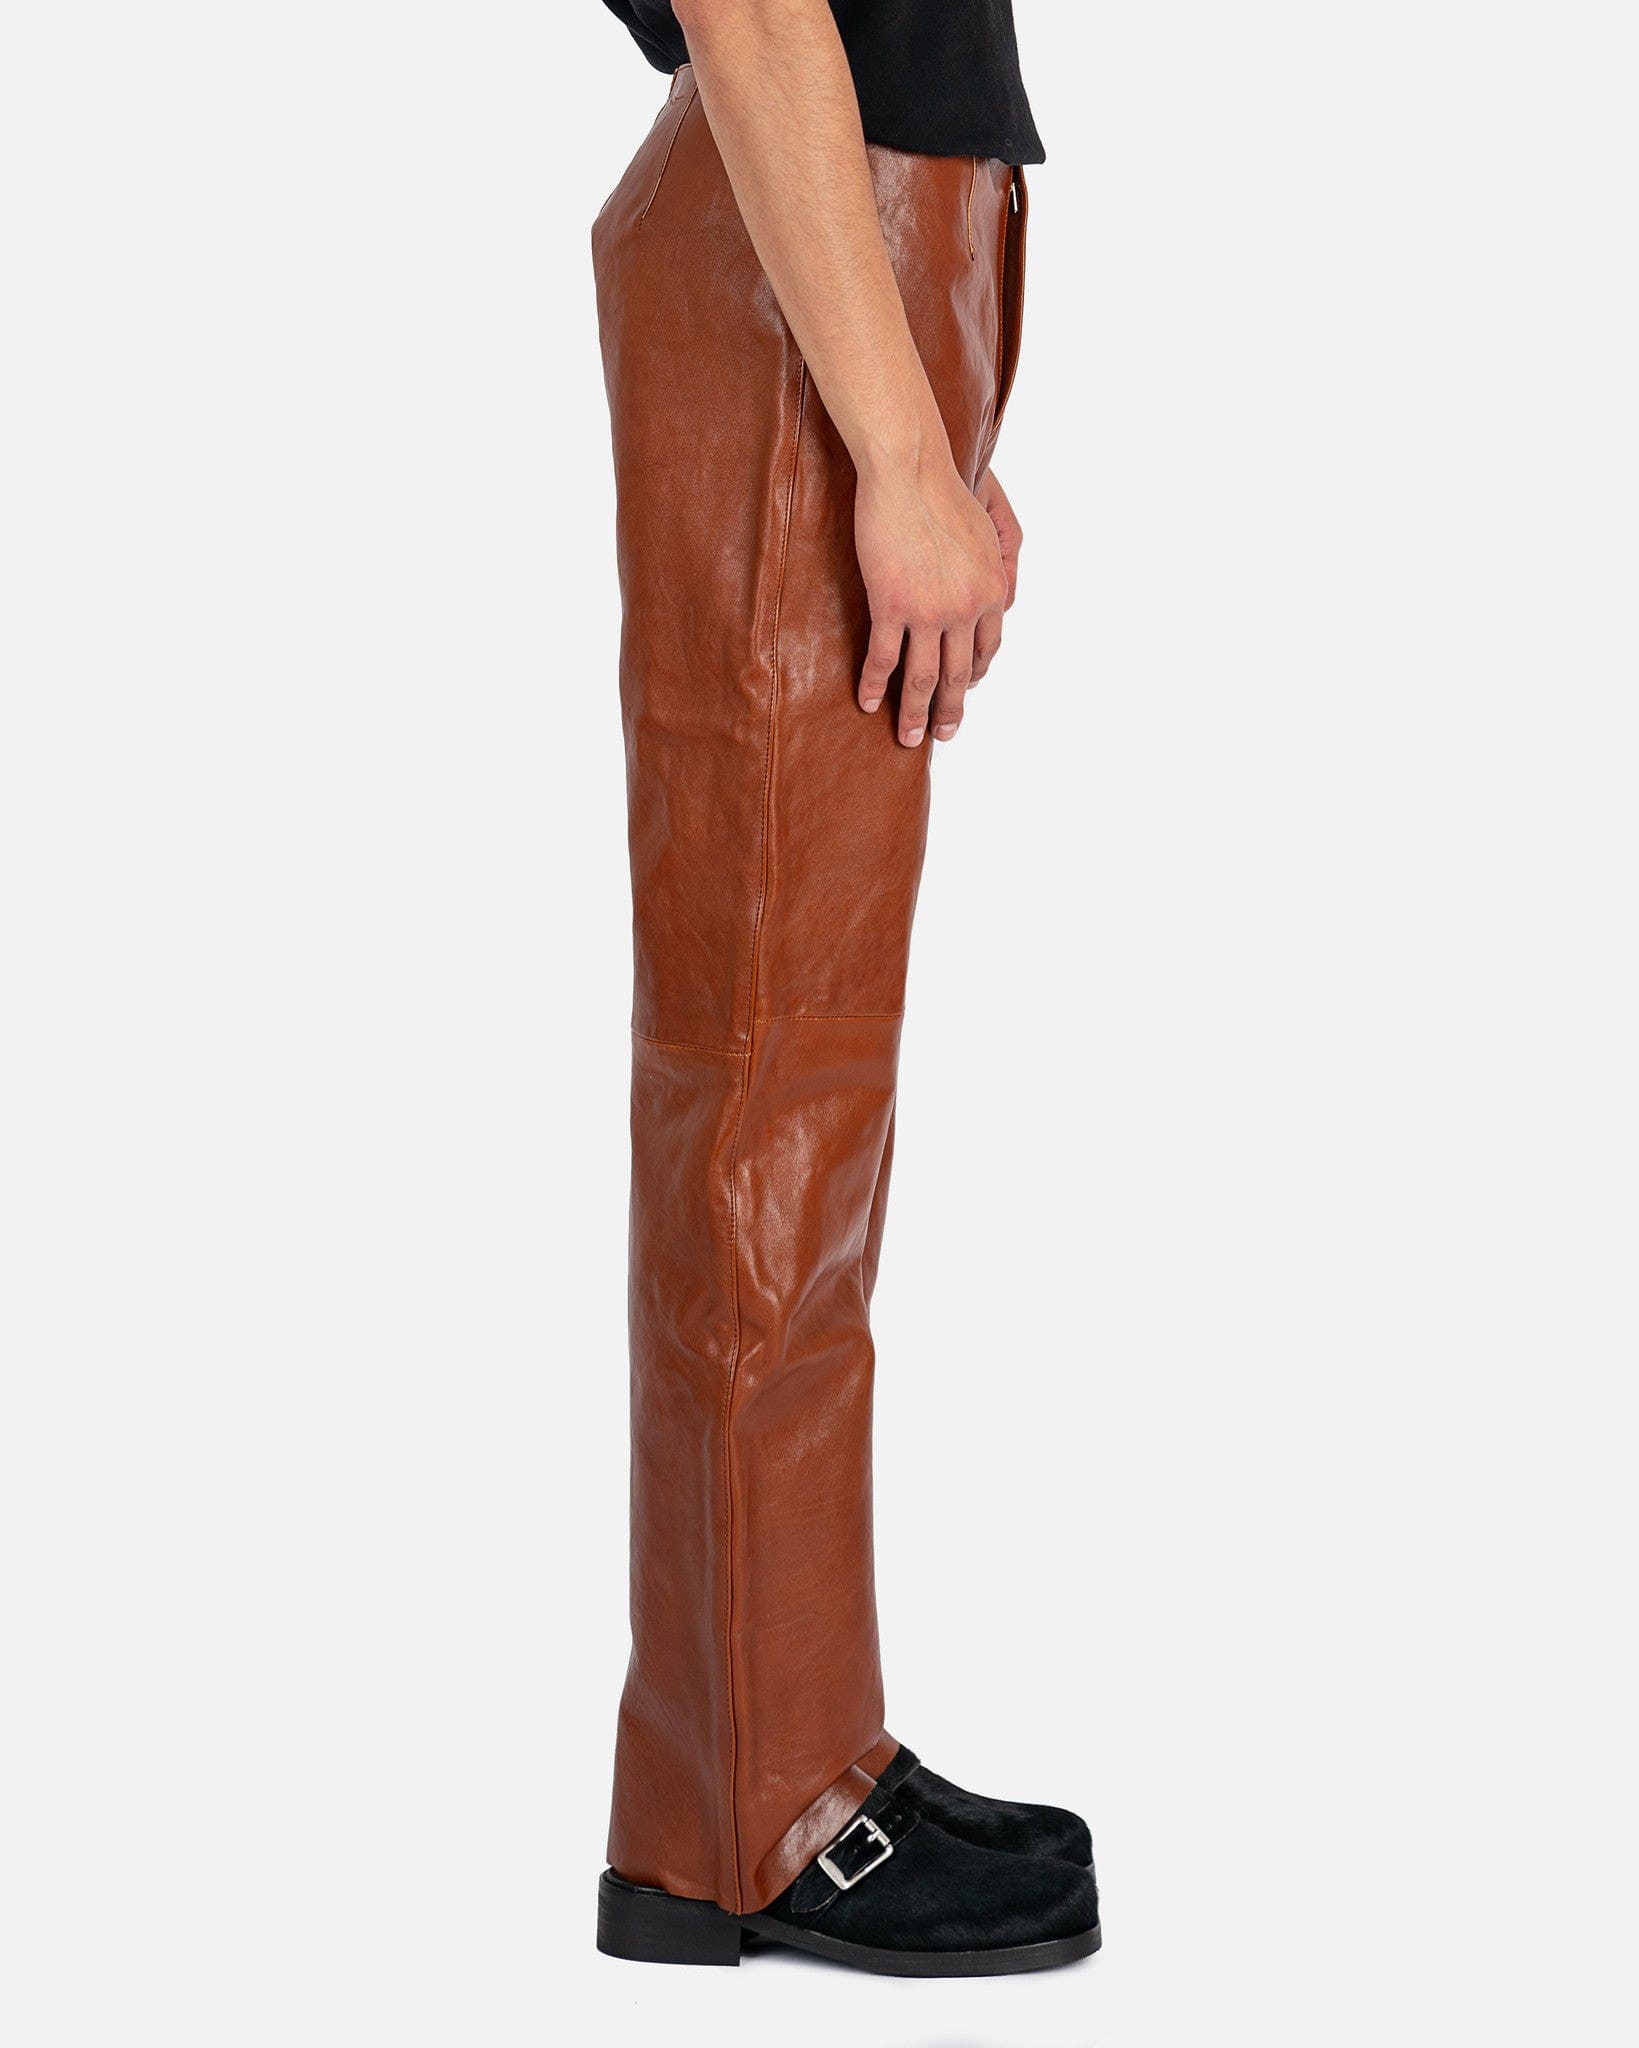 Buy Pure Leather Men Trouser, Biker Leather Trouser , Leather Trouser,  Leather Trousers Men, Leather Trousers Men Online in India - Etsy